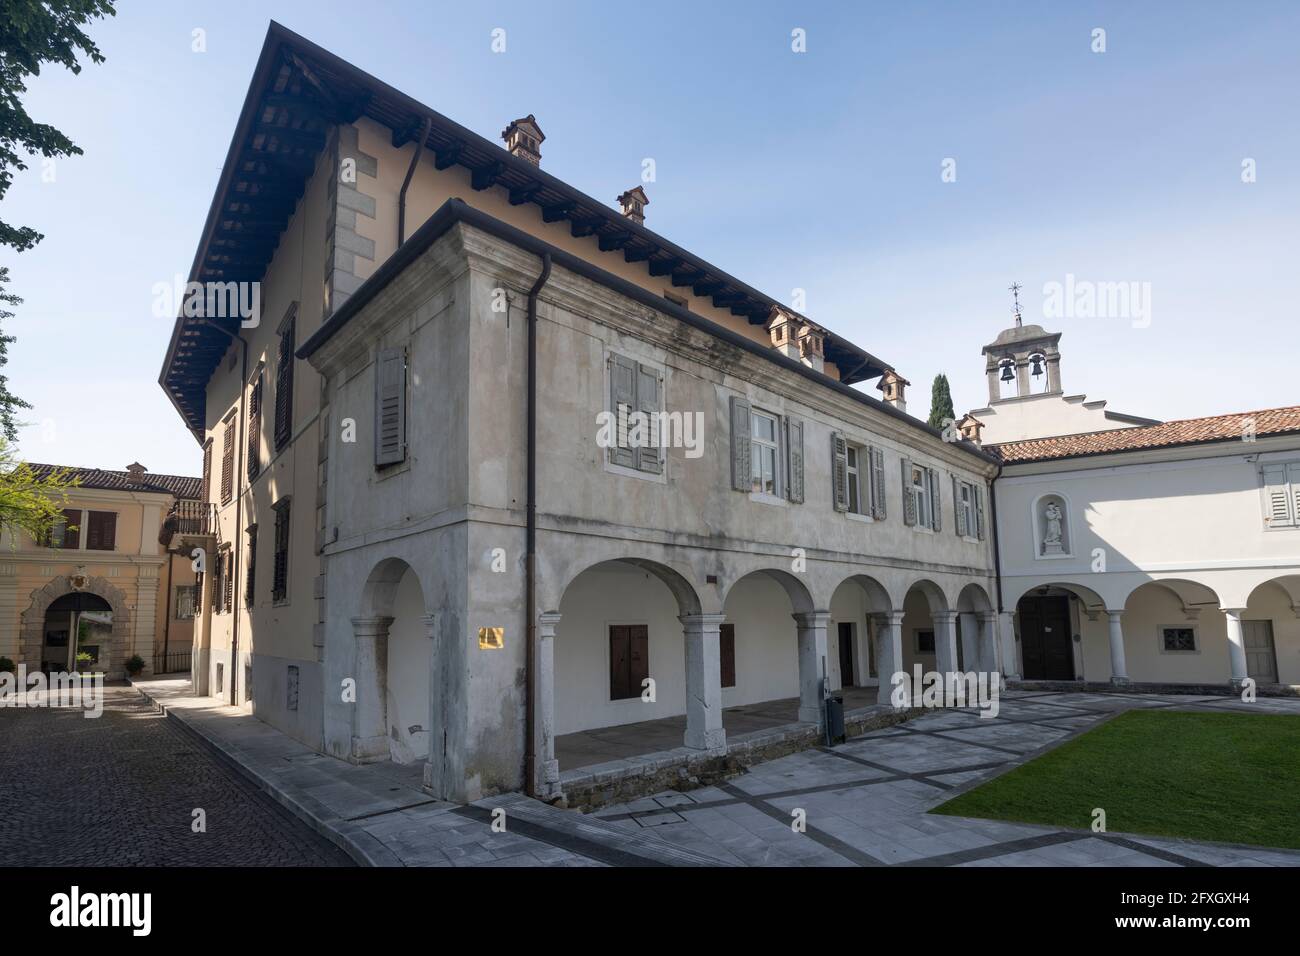 Gorizia, Italy. May 21, 2021.   the facade of the ancient Lantieri palace in the historic center of the city Stock Photo